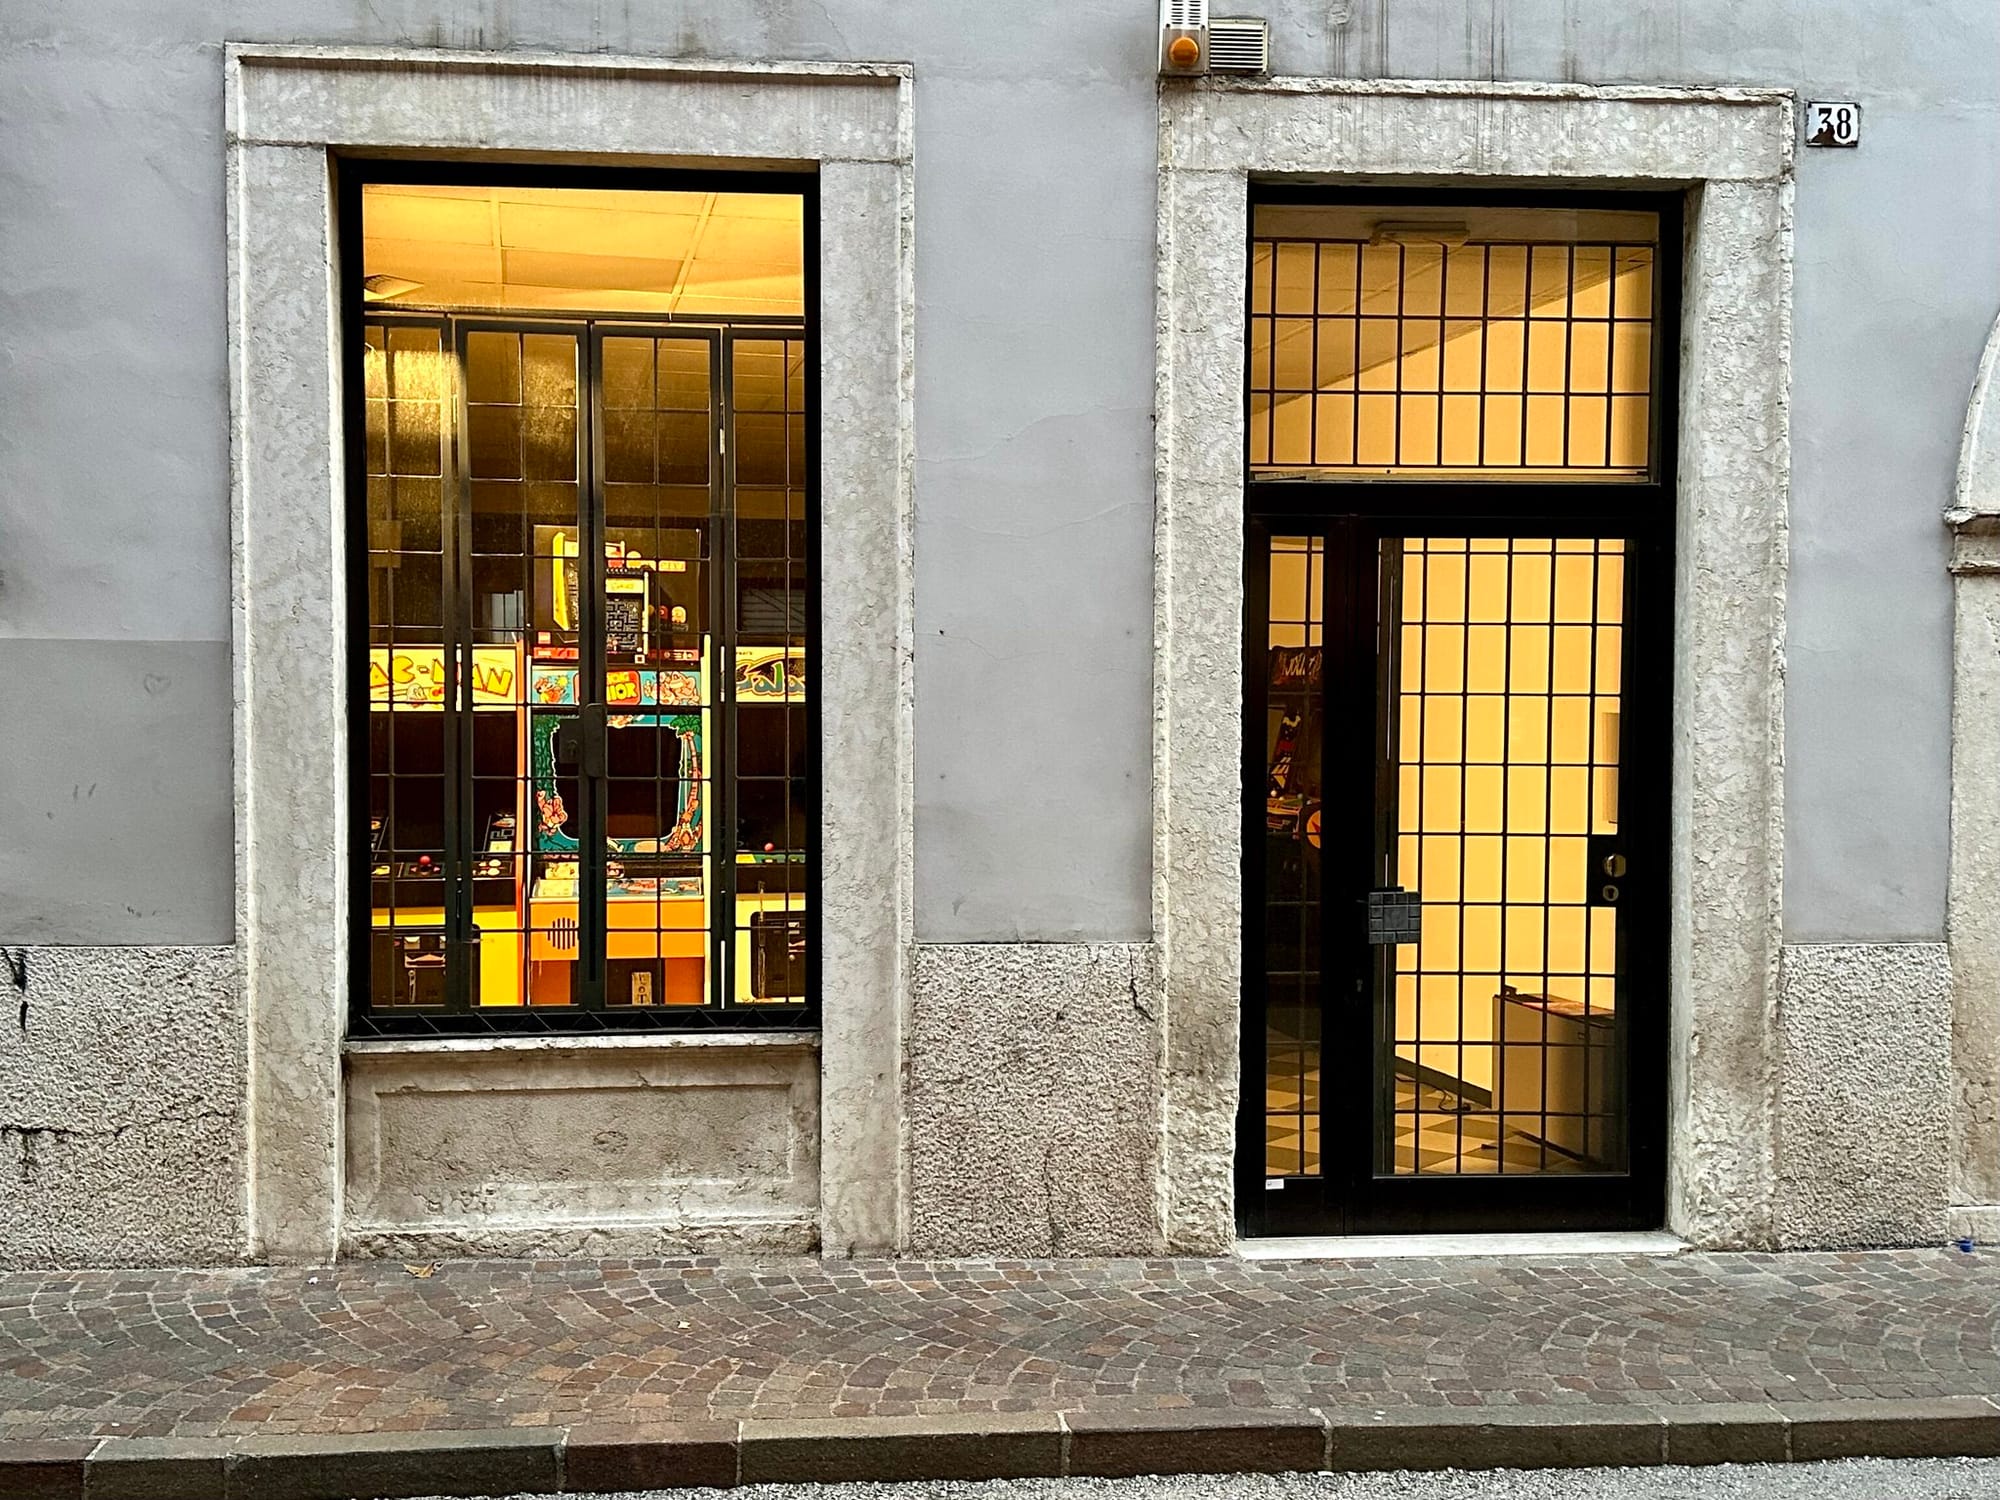 Image of the fron t of a store with a big window and a door with yellow glow lighting inside and video games behind a gate